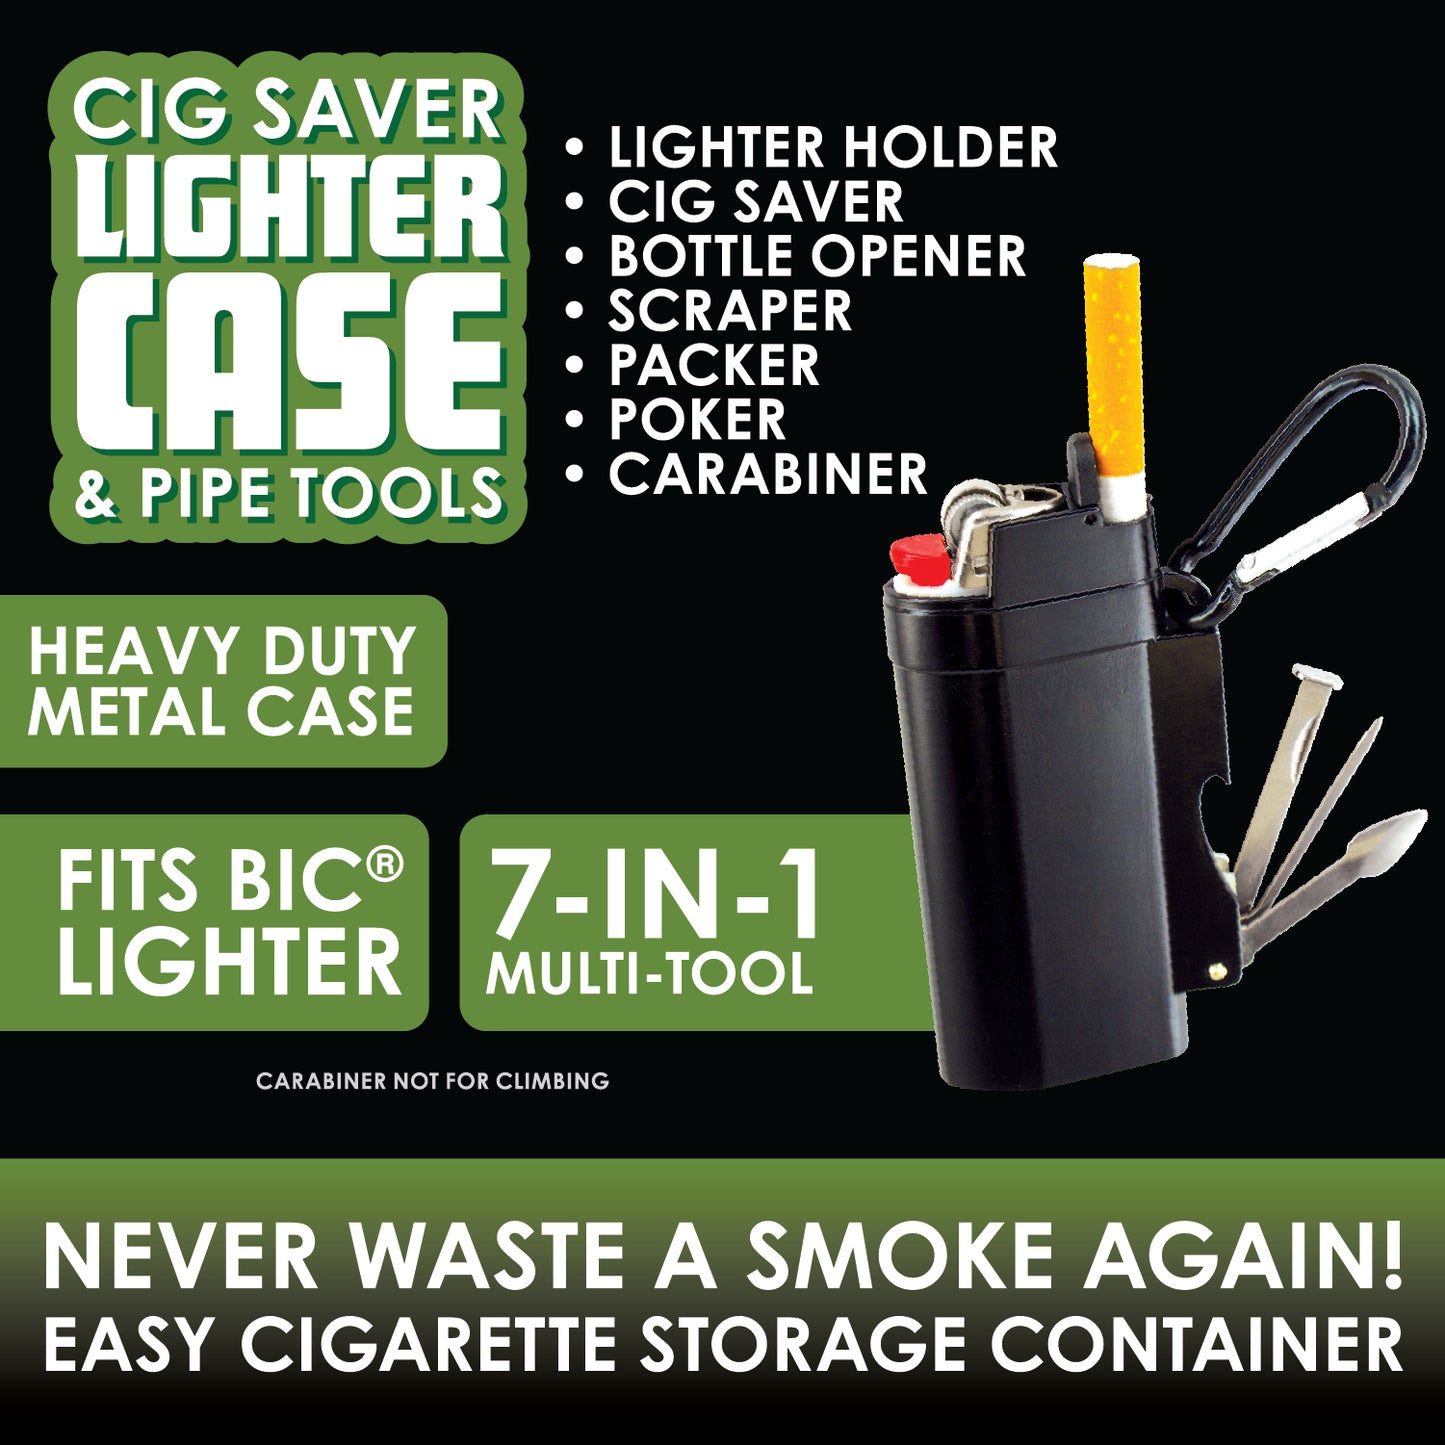 ITEM NUMBER 026028 CIG SAVER LIGHTER CASE WITH TOOLS 12 PIECES PER DISPLAY